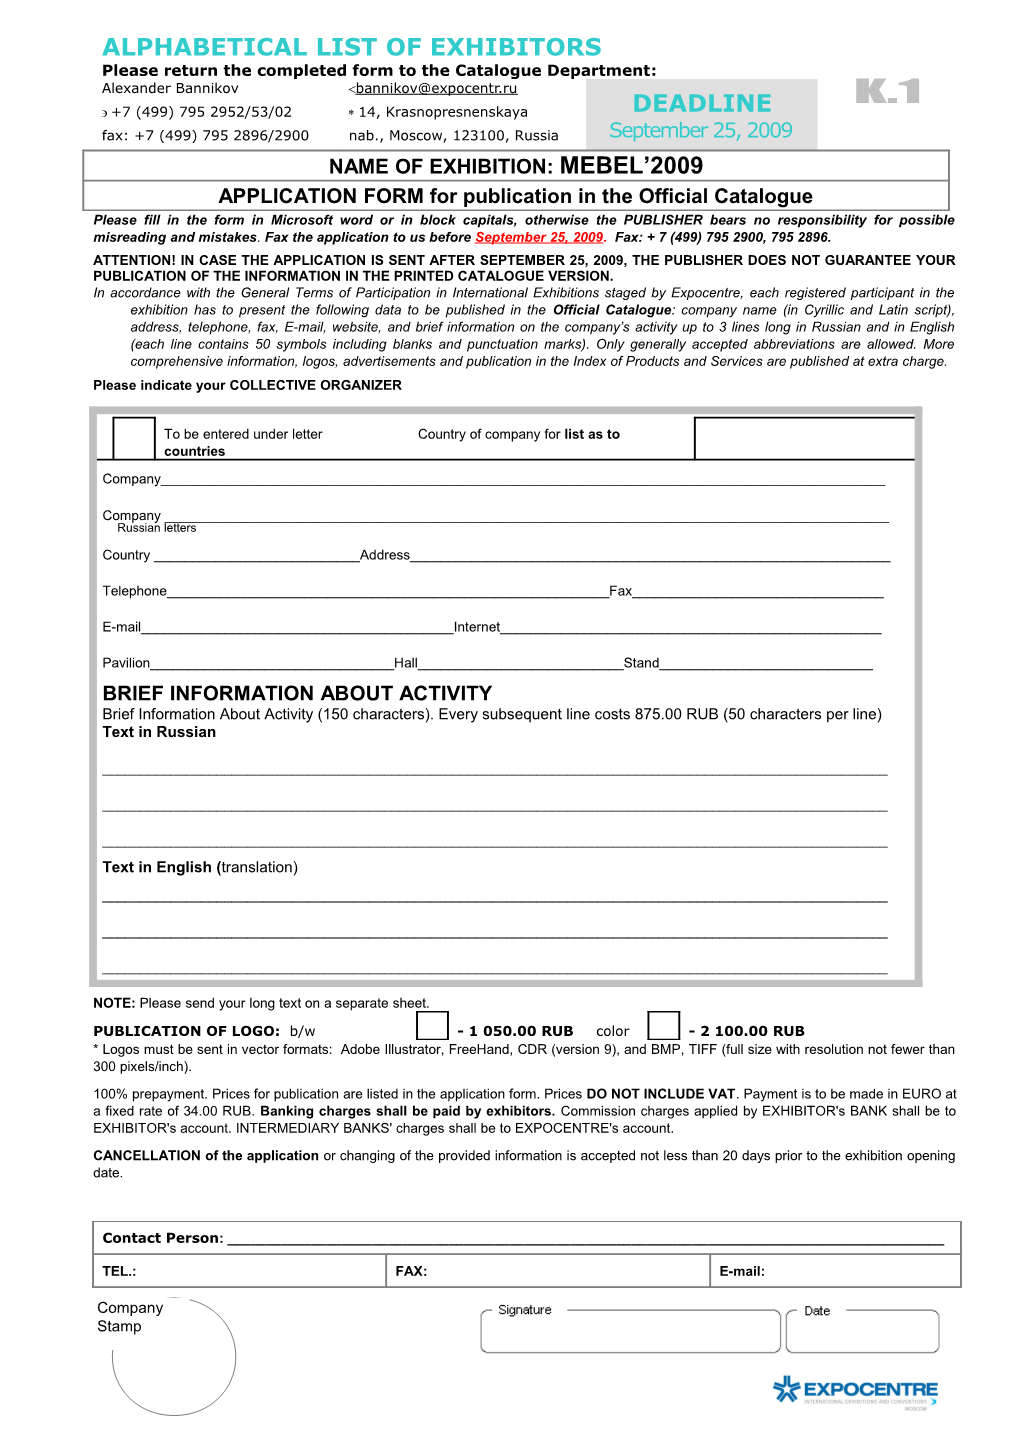 APPLICATION FORM for Publication in the Official Catalogue